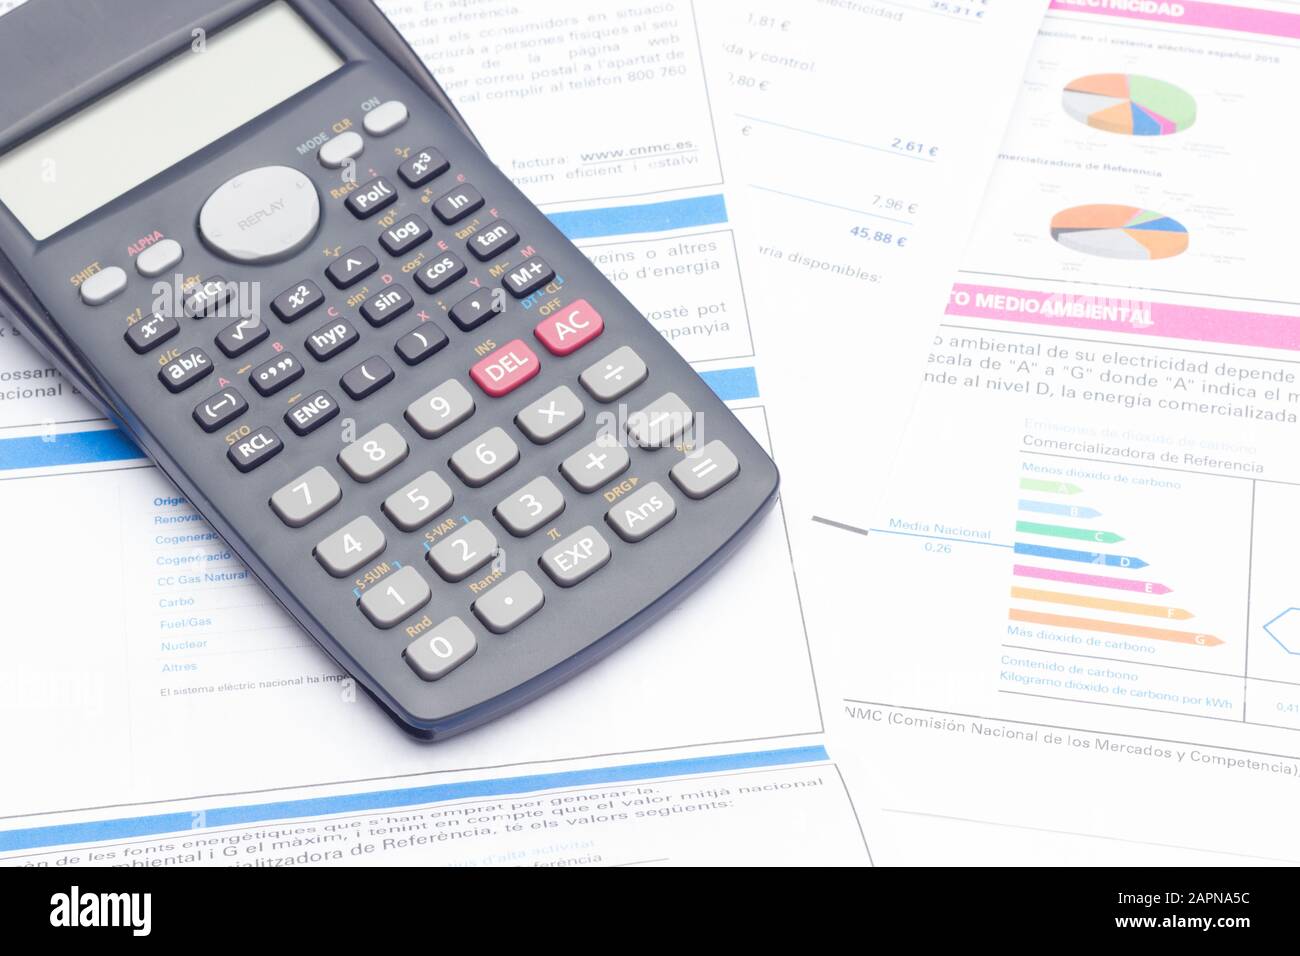 Papers, glasses and calculator to make calculations of the invoices we receive, to make graphs and statistics of our expenses or benefits. scientific Stock Photo